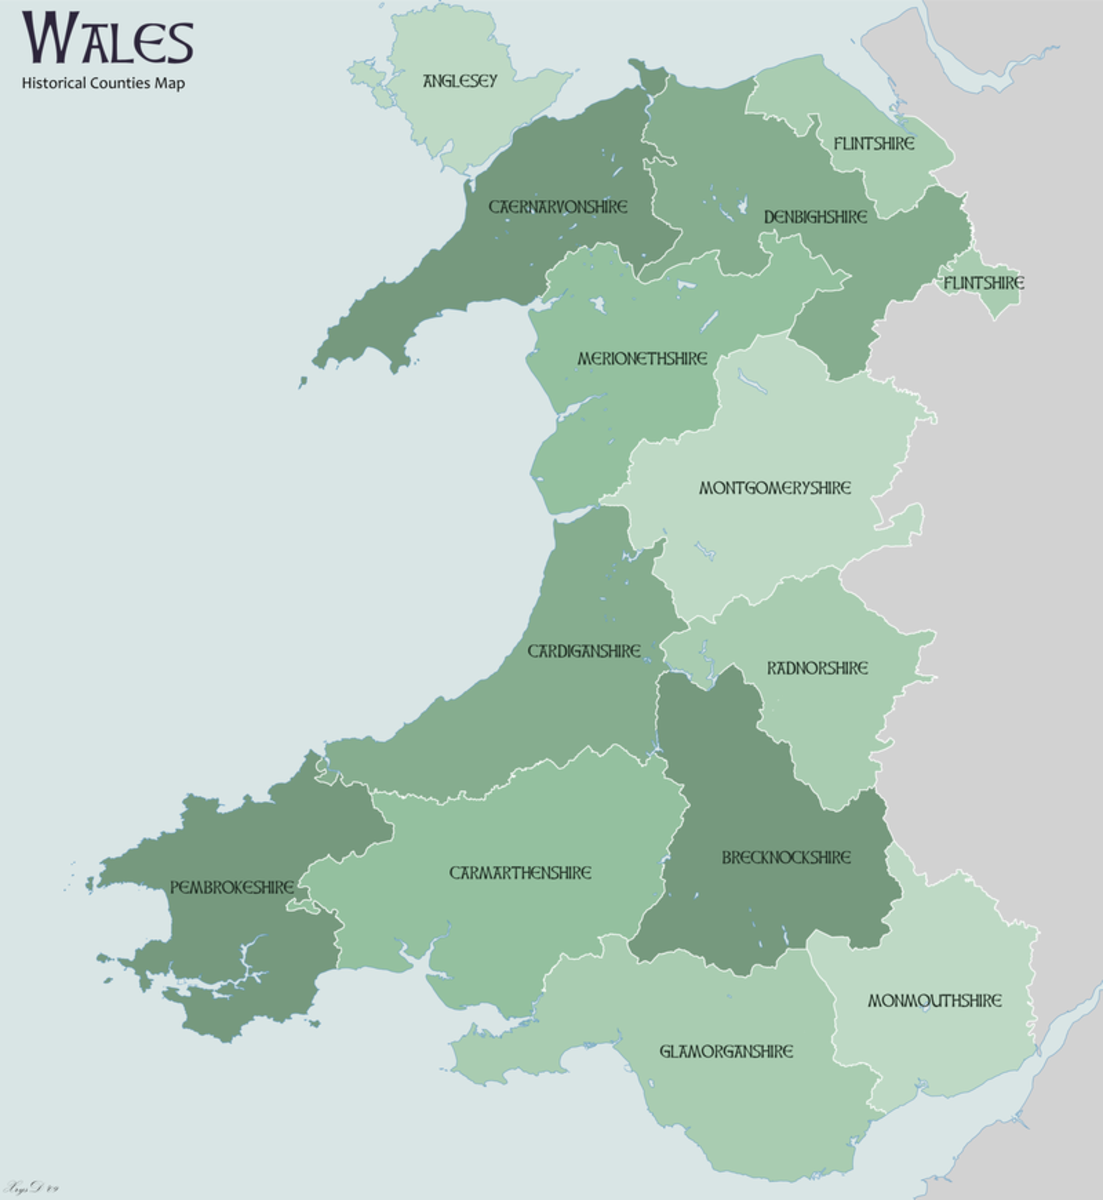 A map showing the historical or ancient counties of Wales.